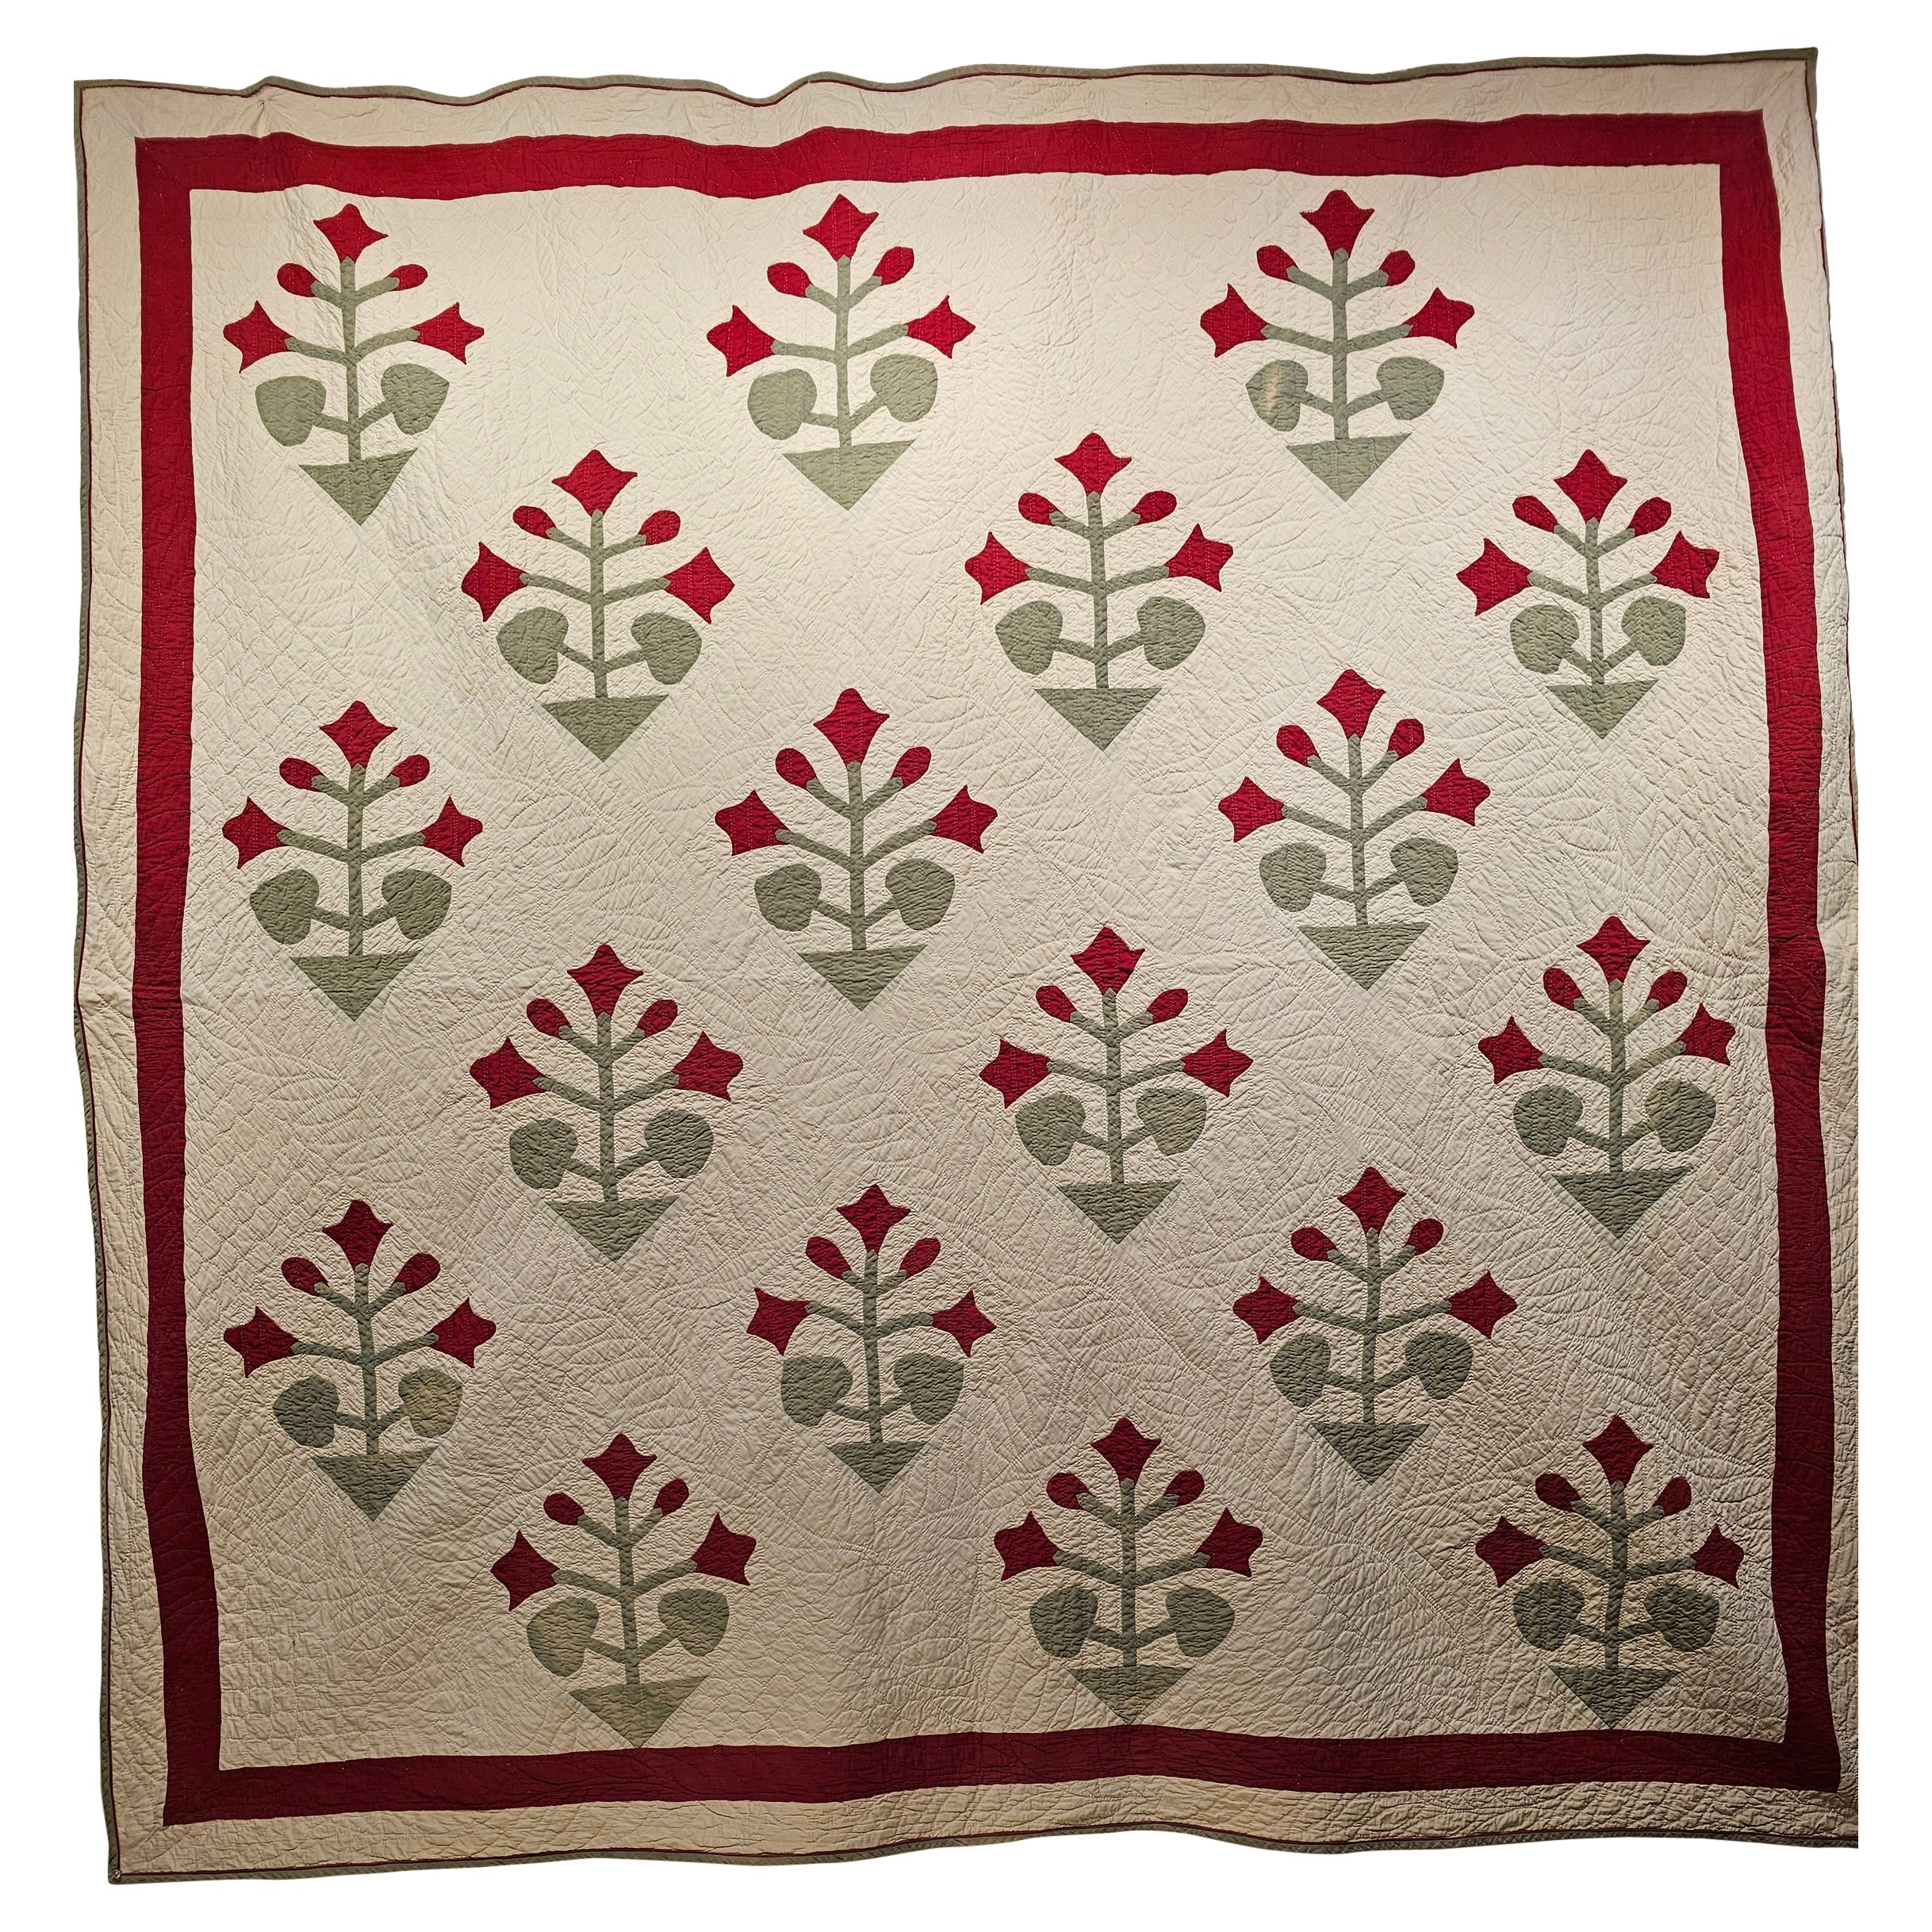 This beautiful American App;ique Quilt was hand stitched in the late 1800s in Pennsylvania in the United States. The American Applique Quilt is in “Floral” pattern with red flowers with green stems and leaves on an ivory field.  The quilt was hand